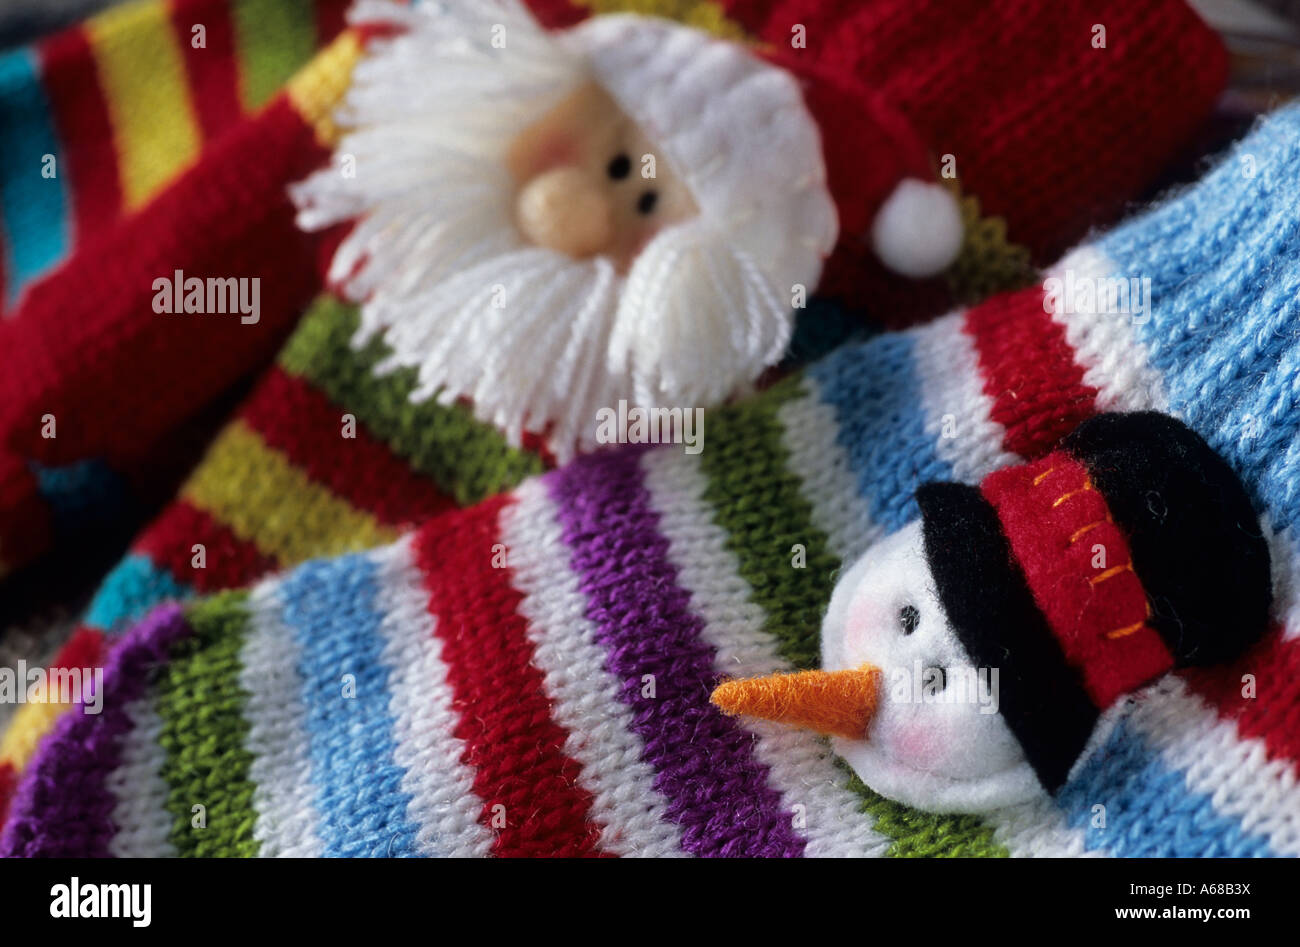 Children s mittens with Christmas motifs Stock Photo